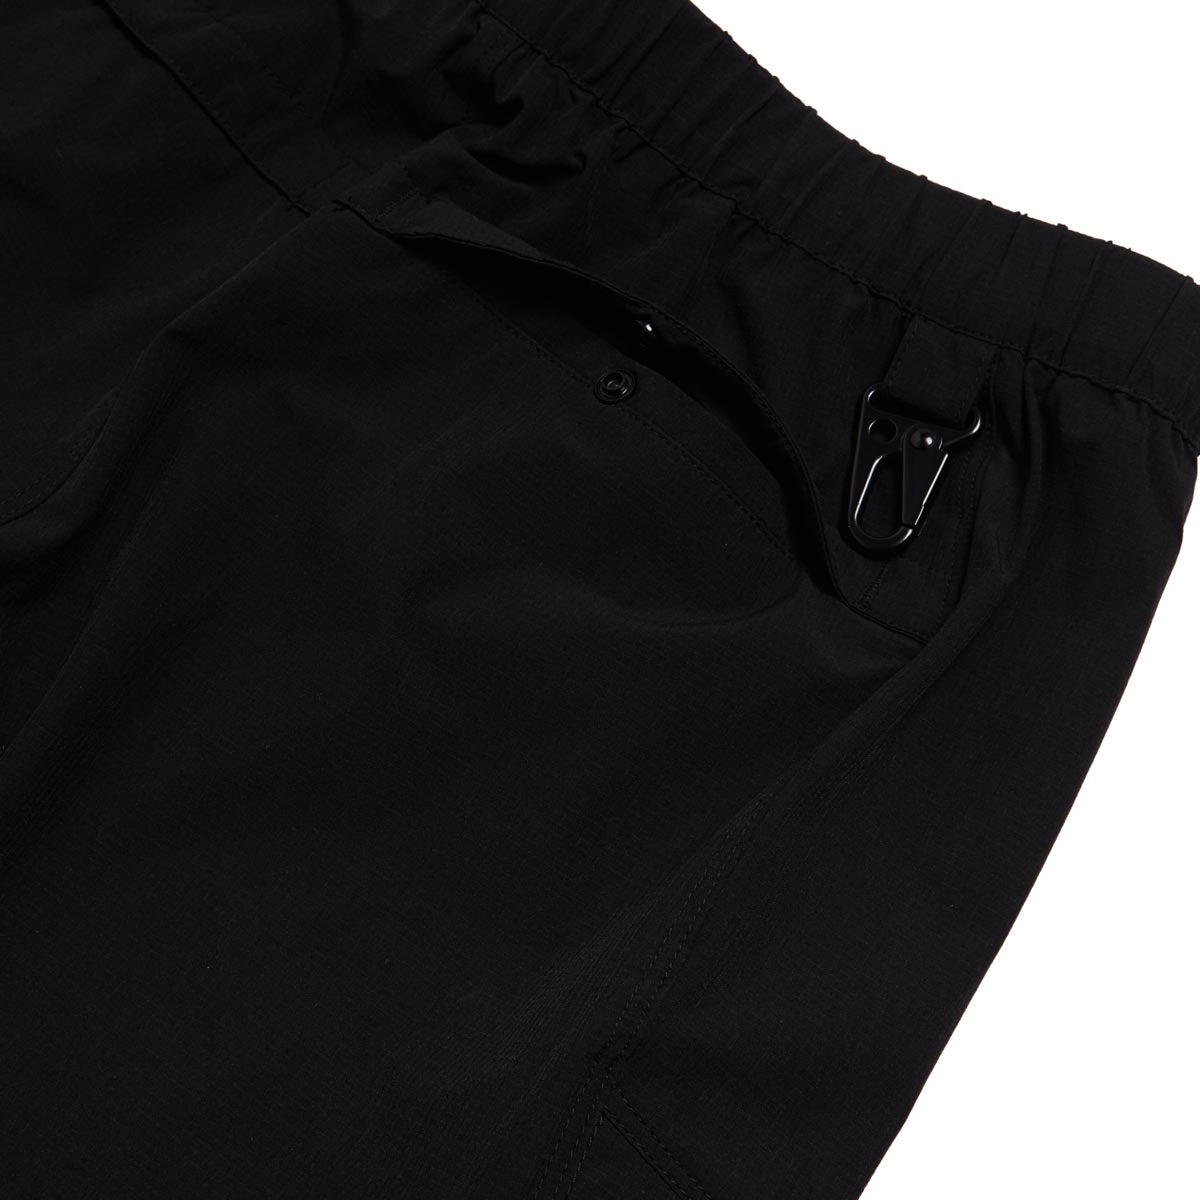 Kennedy The Ascension Cargo Pants - Black image 5